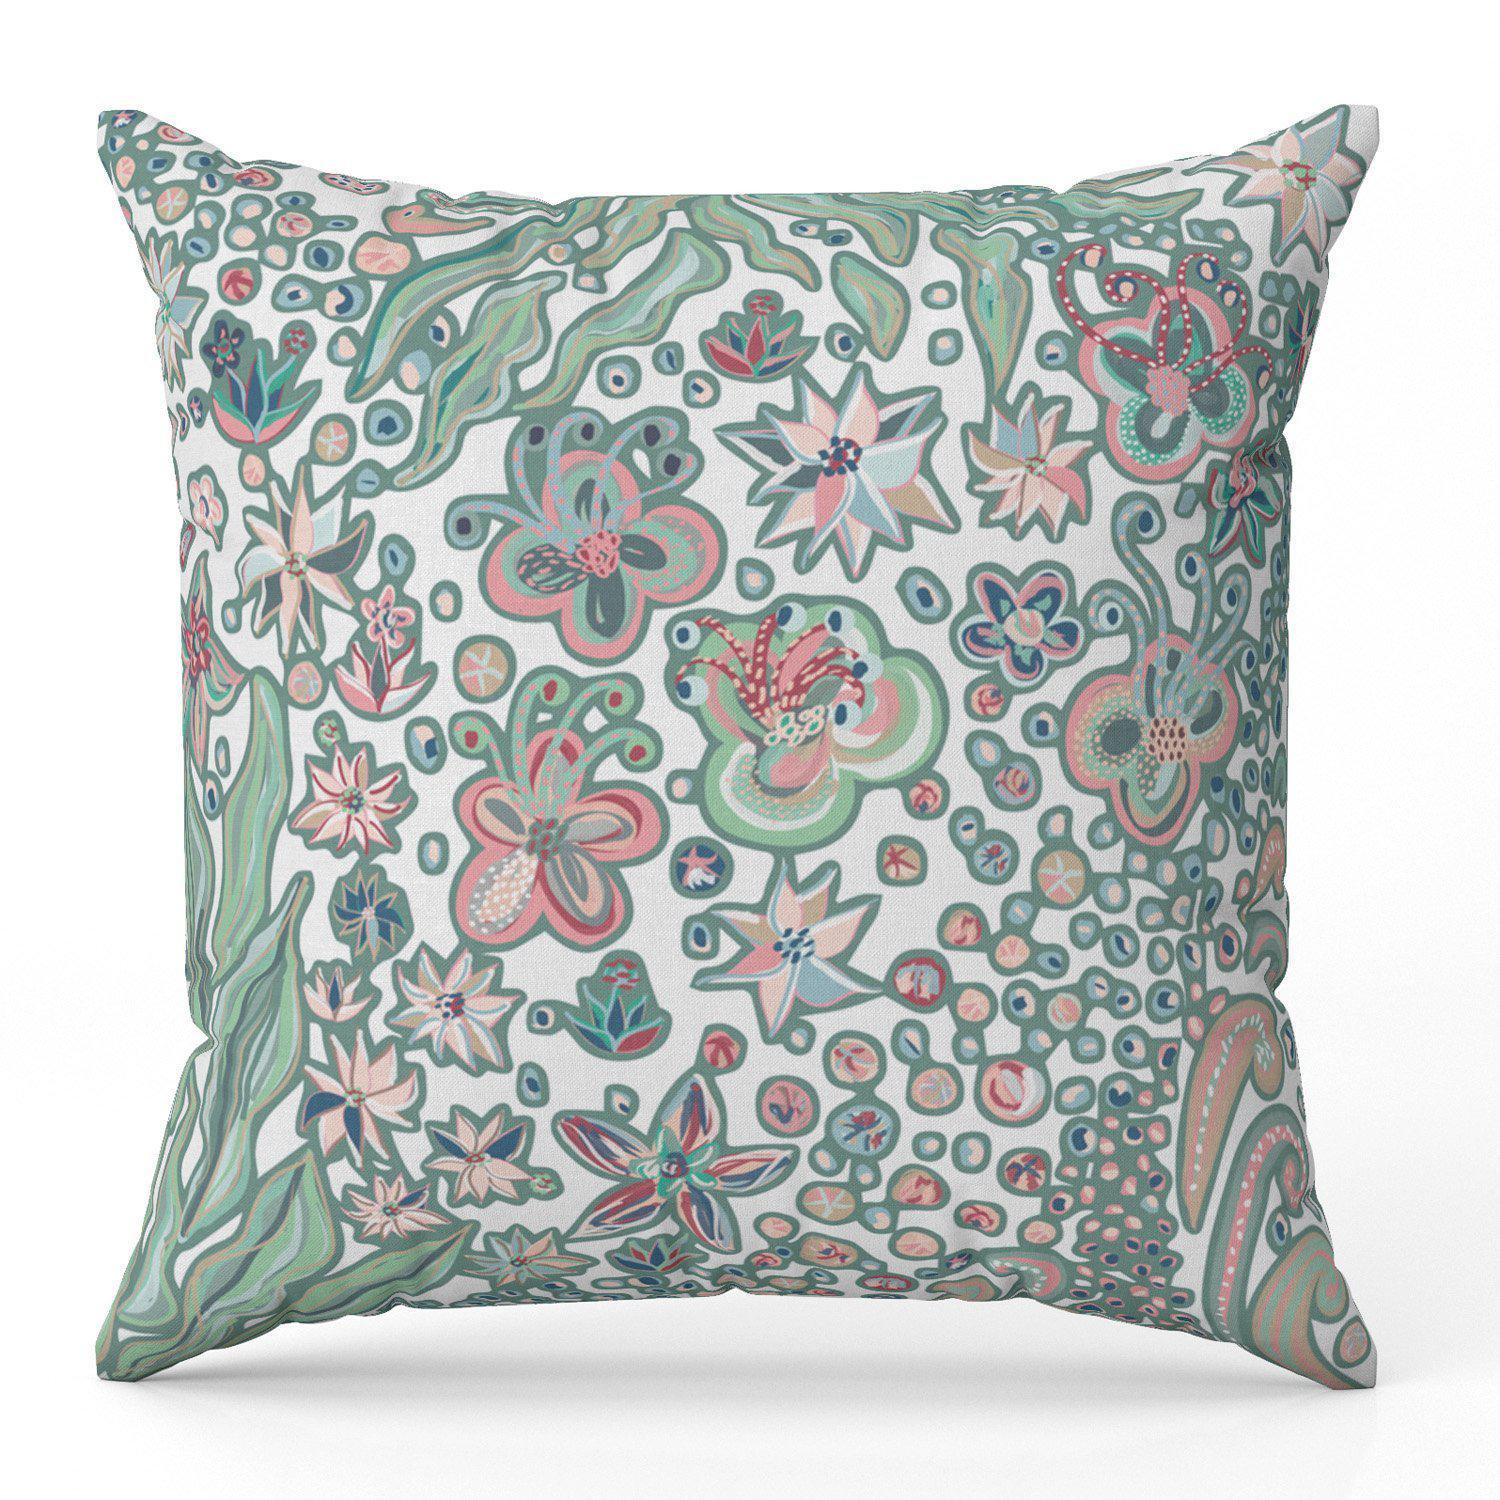 Indian Dreams (White) - Funky Art Cushion - Bellissima - House Of Turnowsky Pillows - Handmade Cushions UK - WeLoveCushions